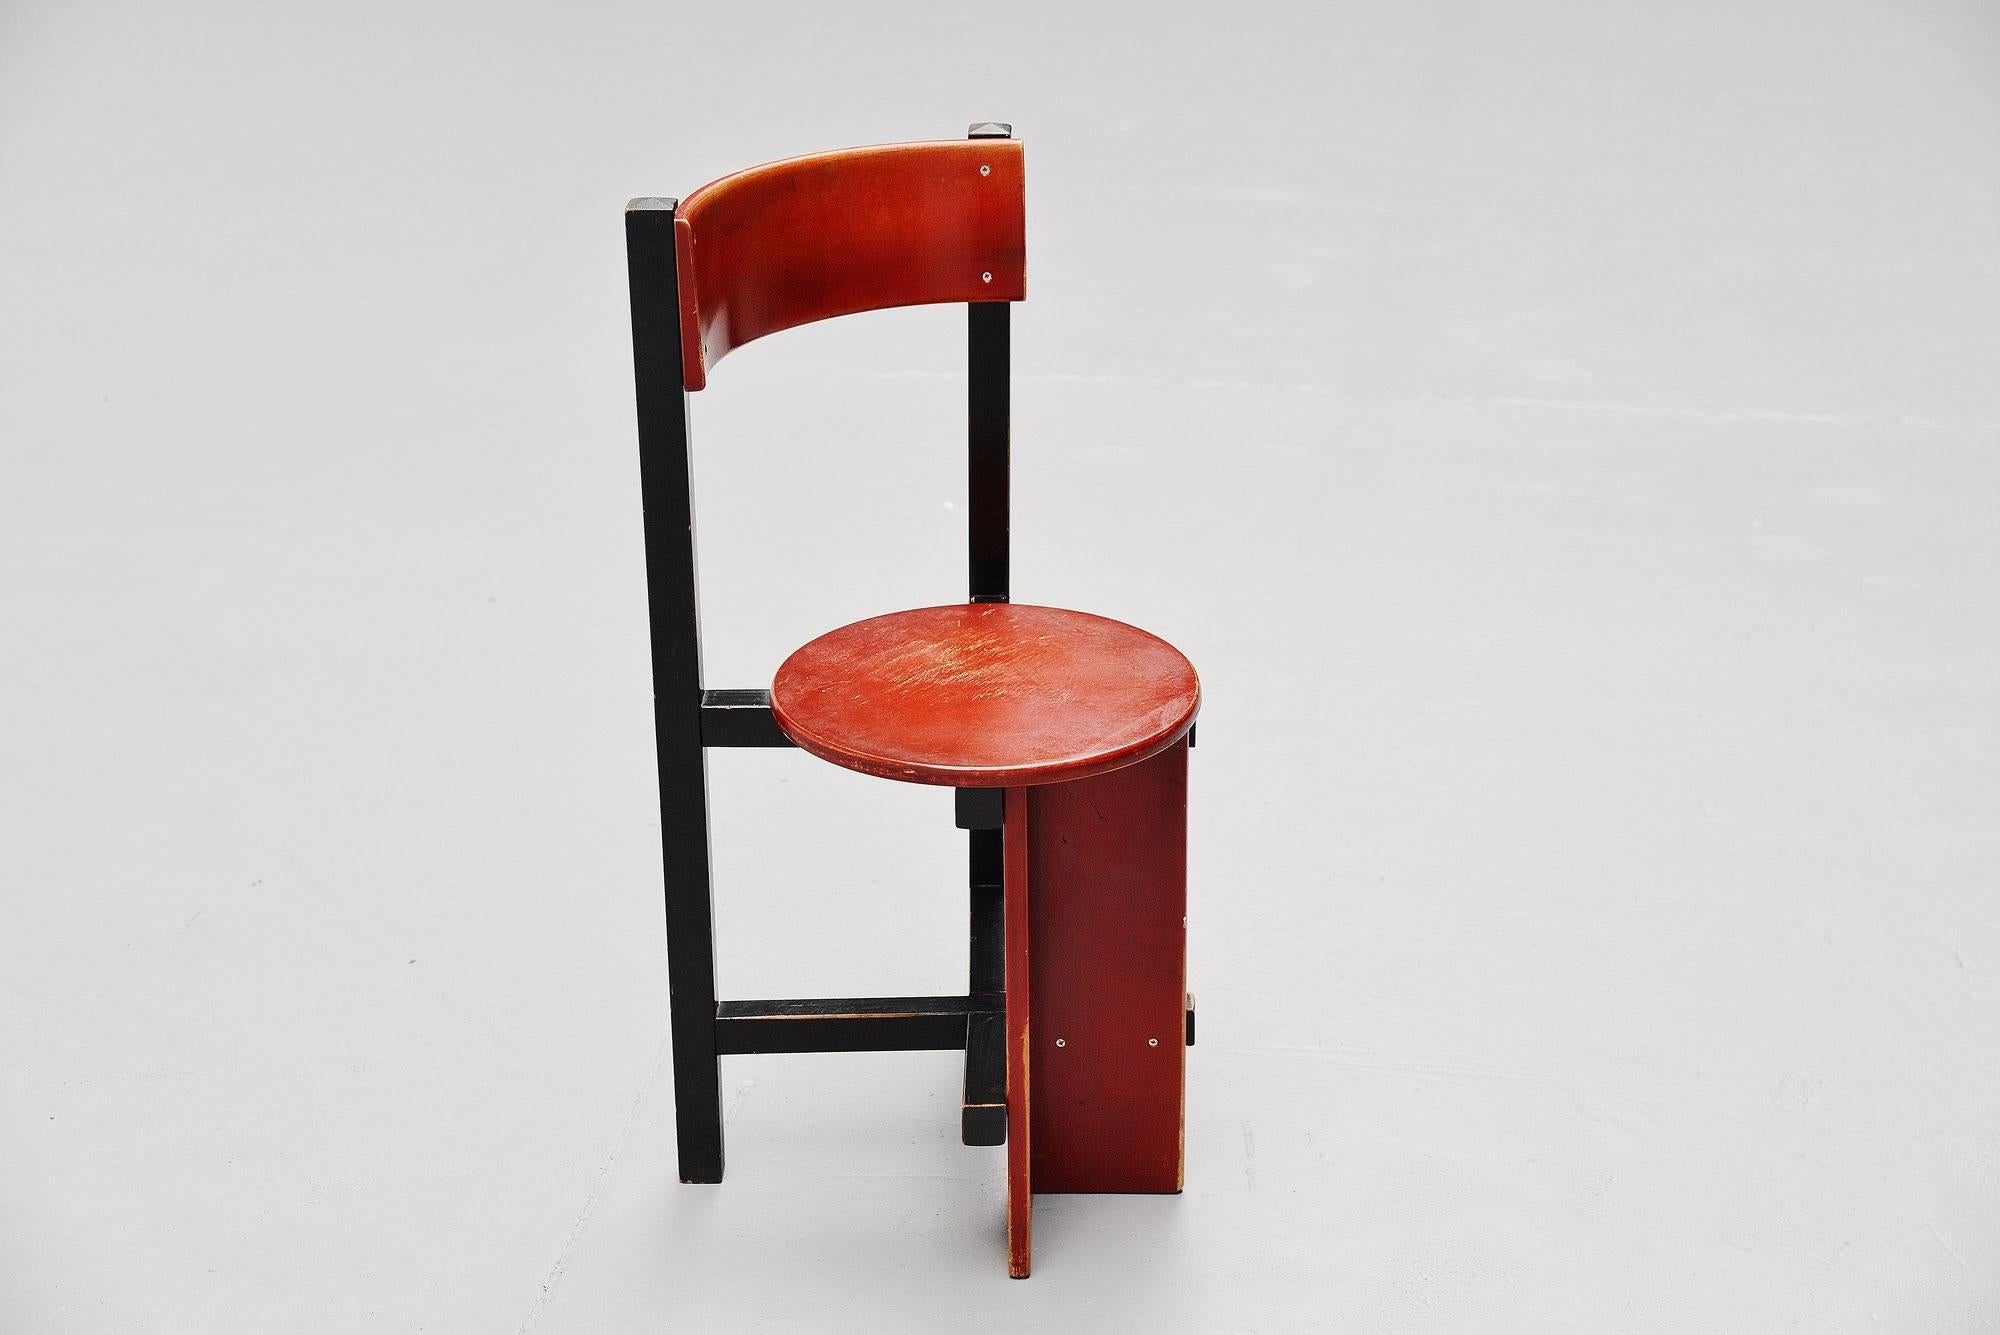 Piet Blom Bastille Chair for Twente Institute of Technology, 1964 In Good Condition For Sale In Roosendaal, NL